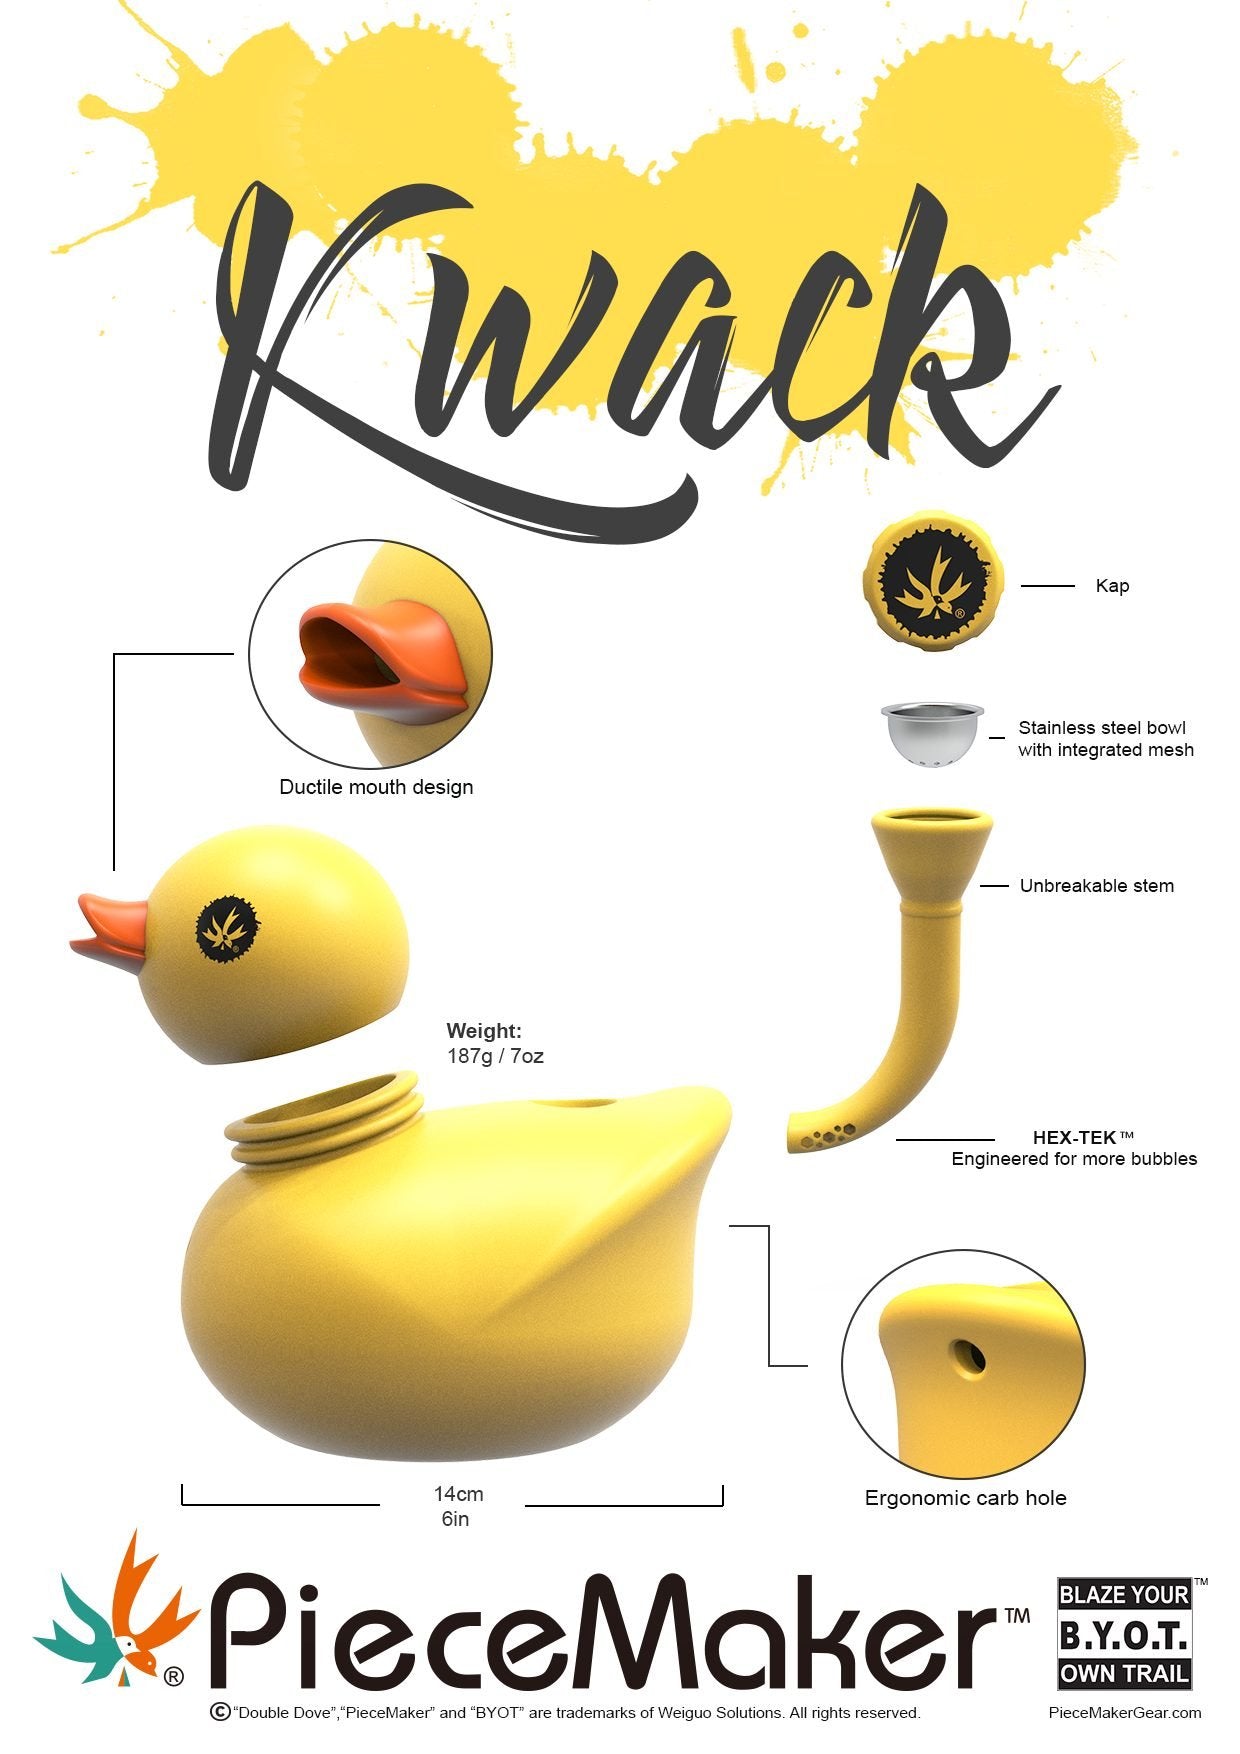 PieceMaker The Kwack